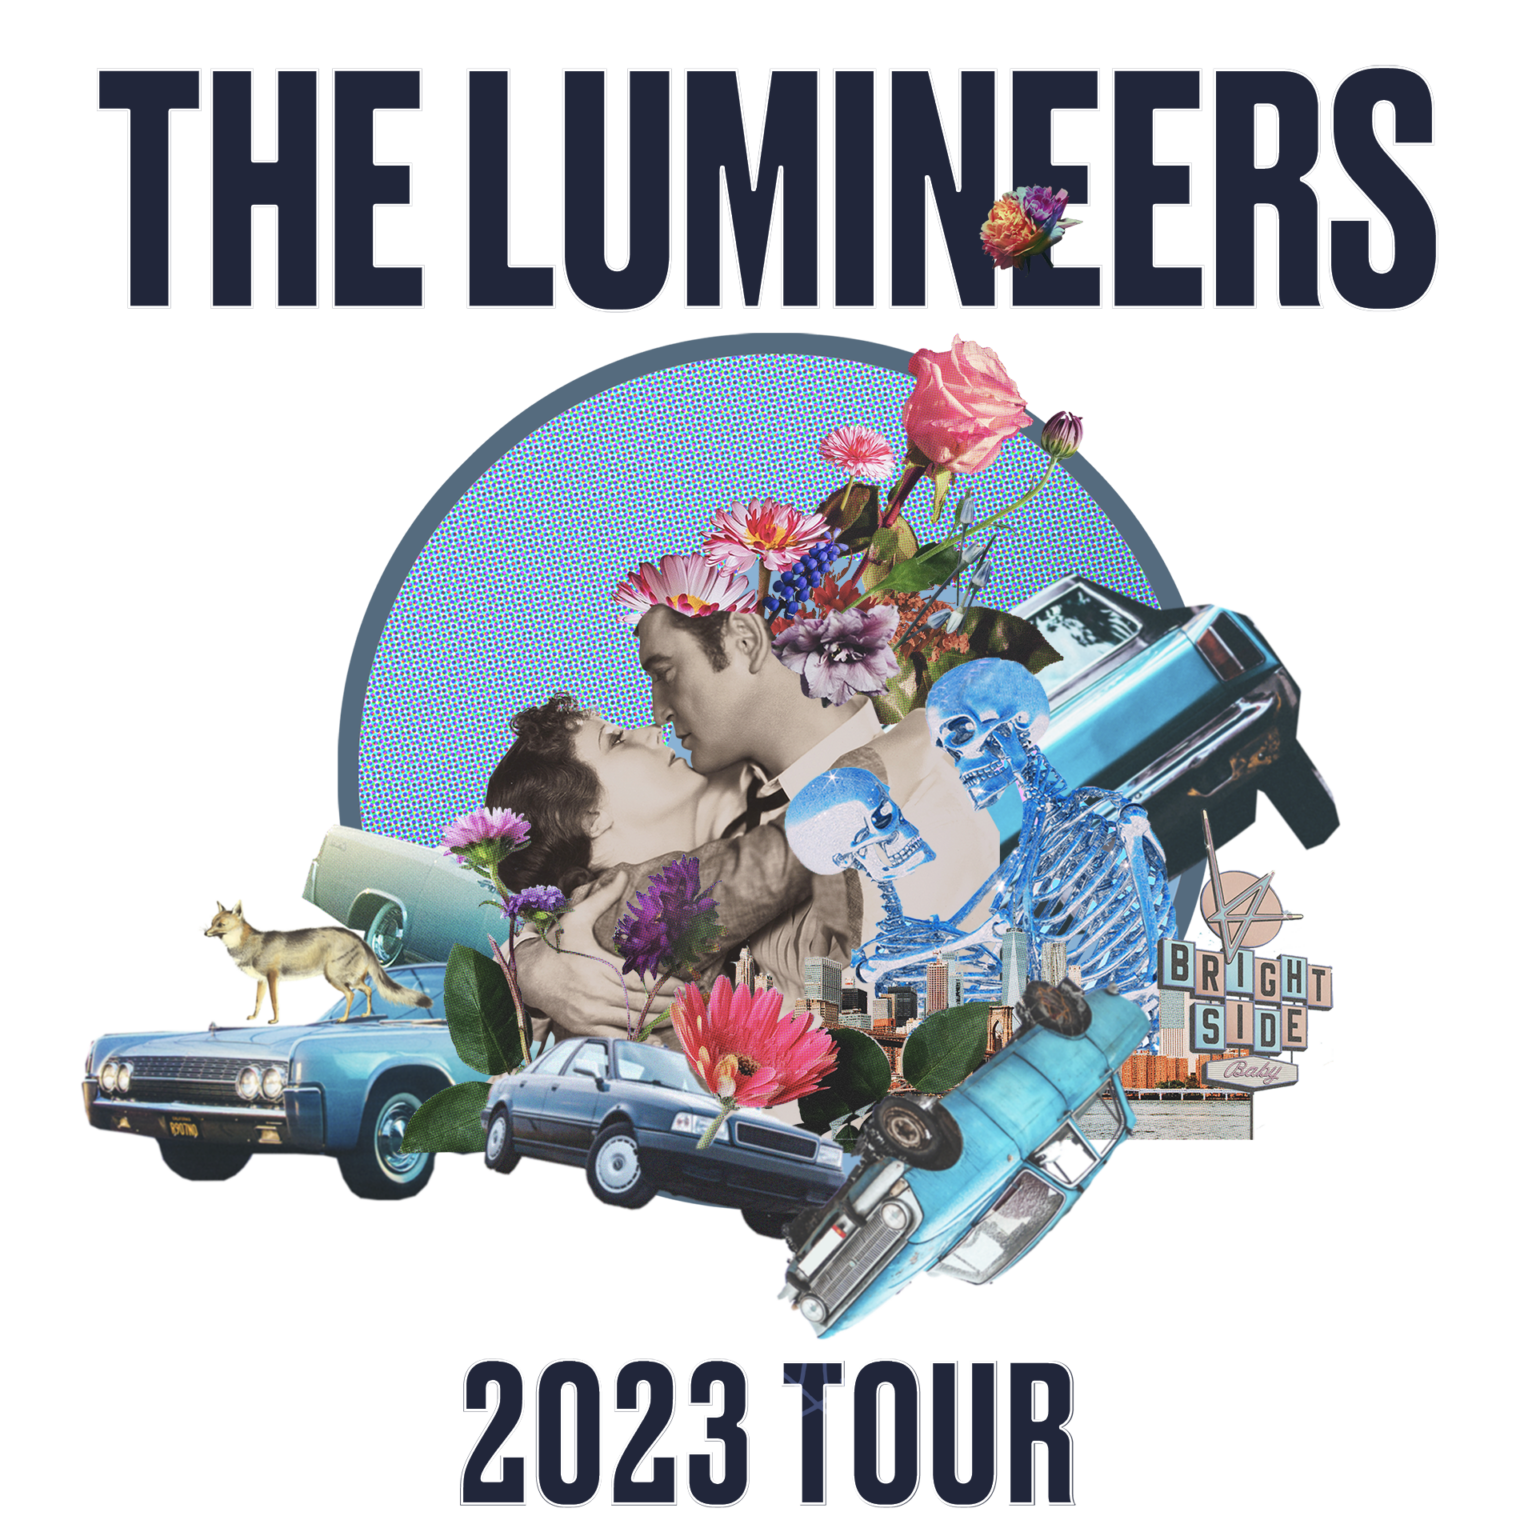 the lumineers tour 2023 crystal palace